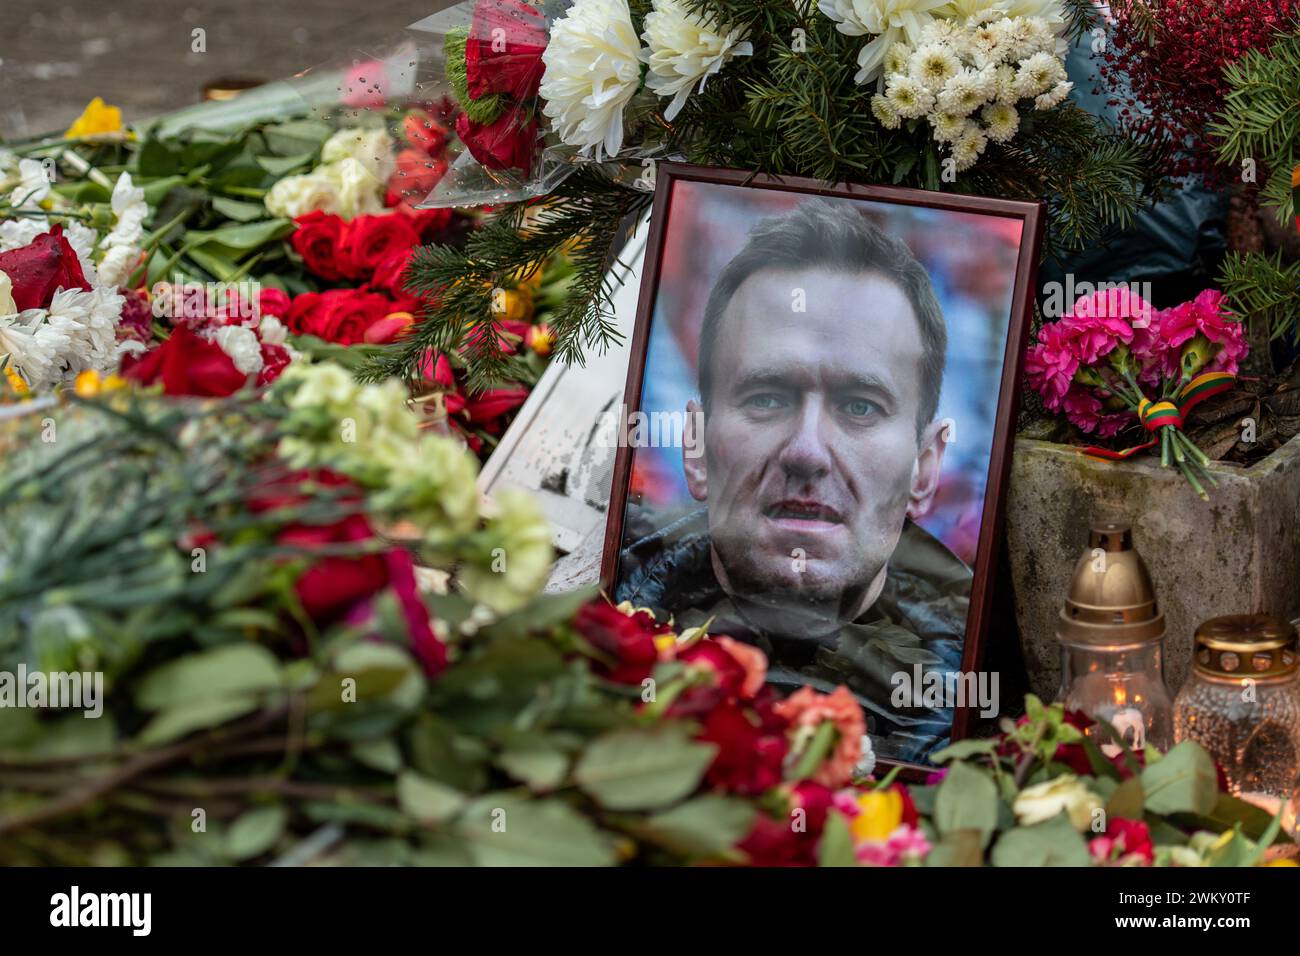 Flowers and candles laid at spontaneous memorial for Russian opposition leader Alexei Navalny, with portrait and messages wet from the snow and rain Stock Photo